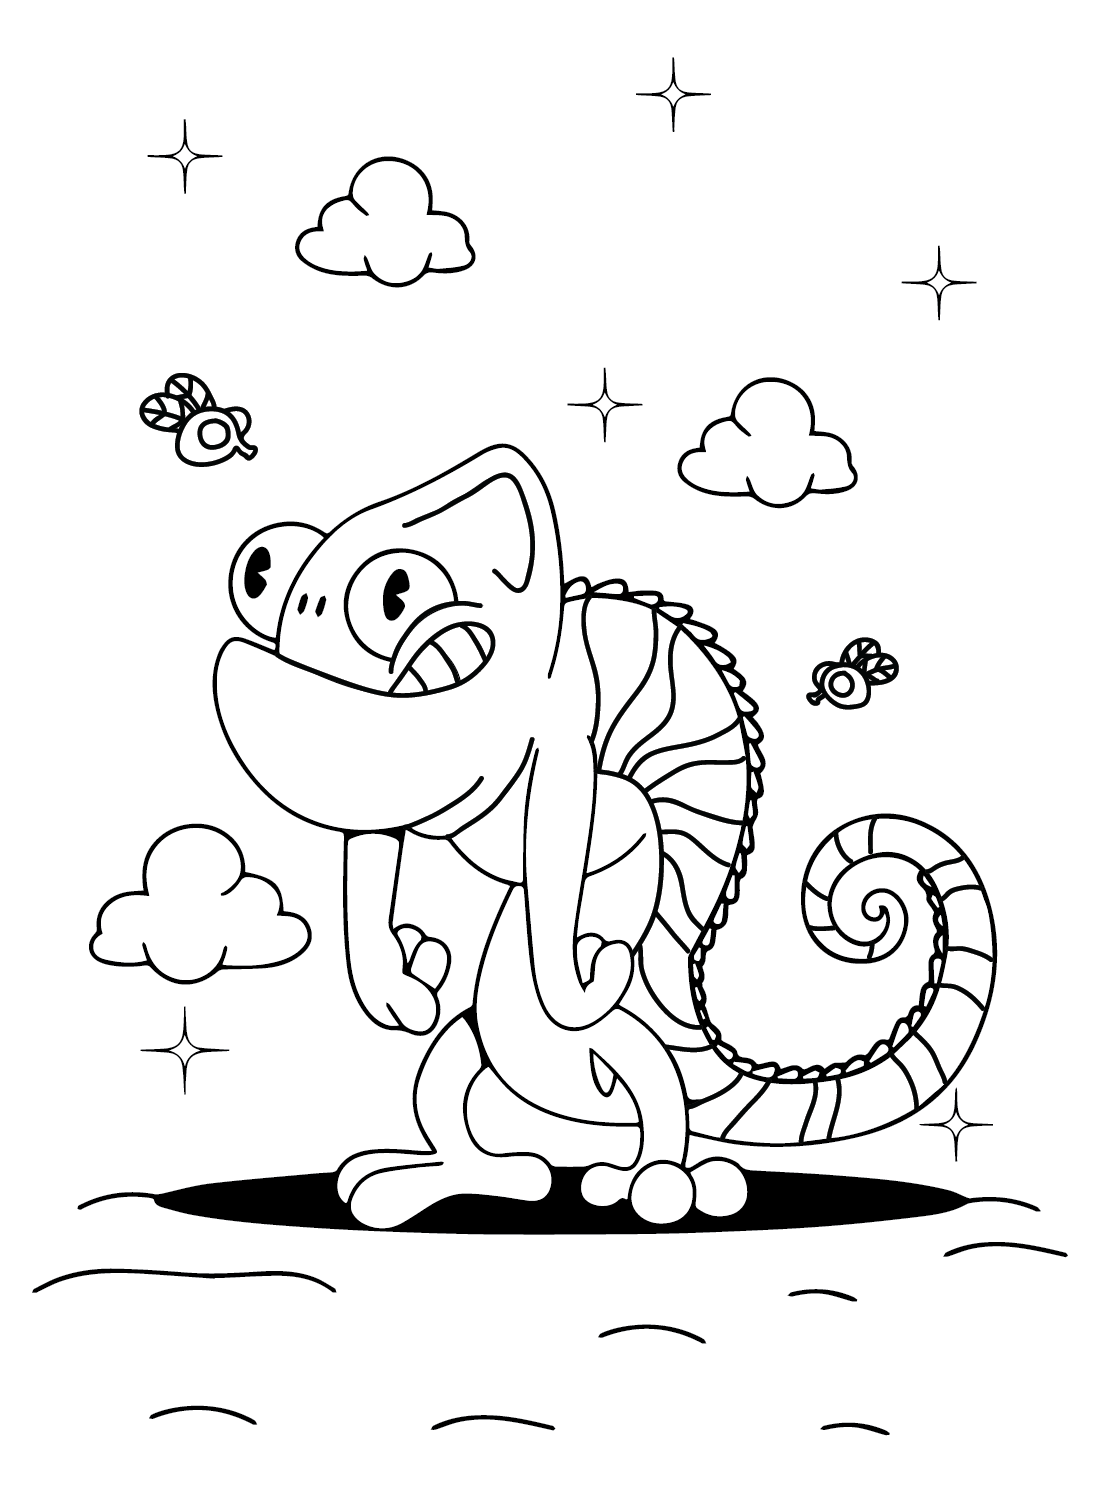 Chameleon Pictures to Color from Chameleon